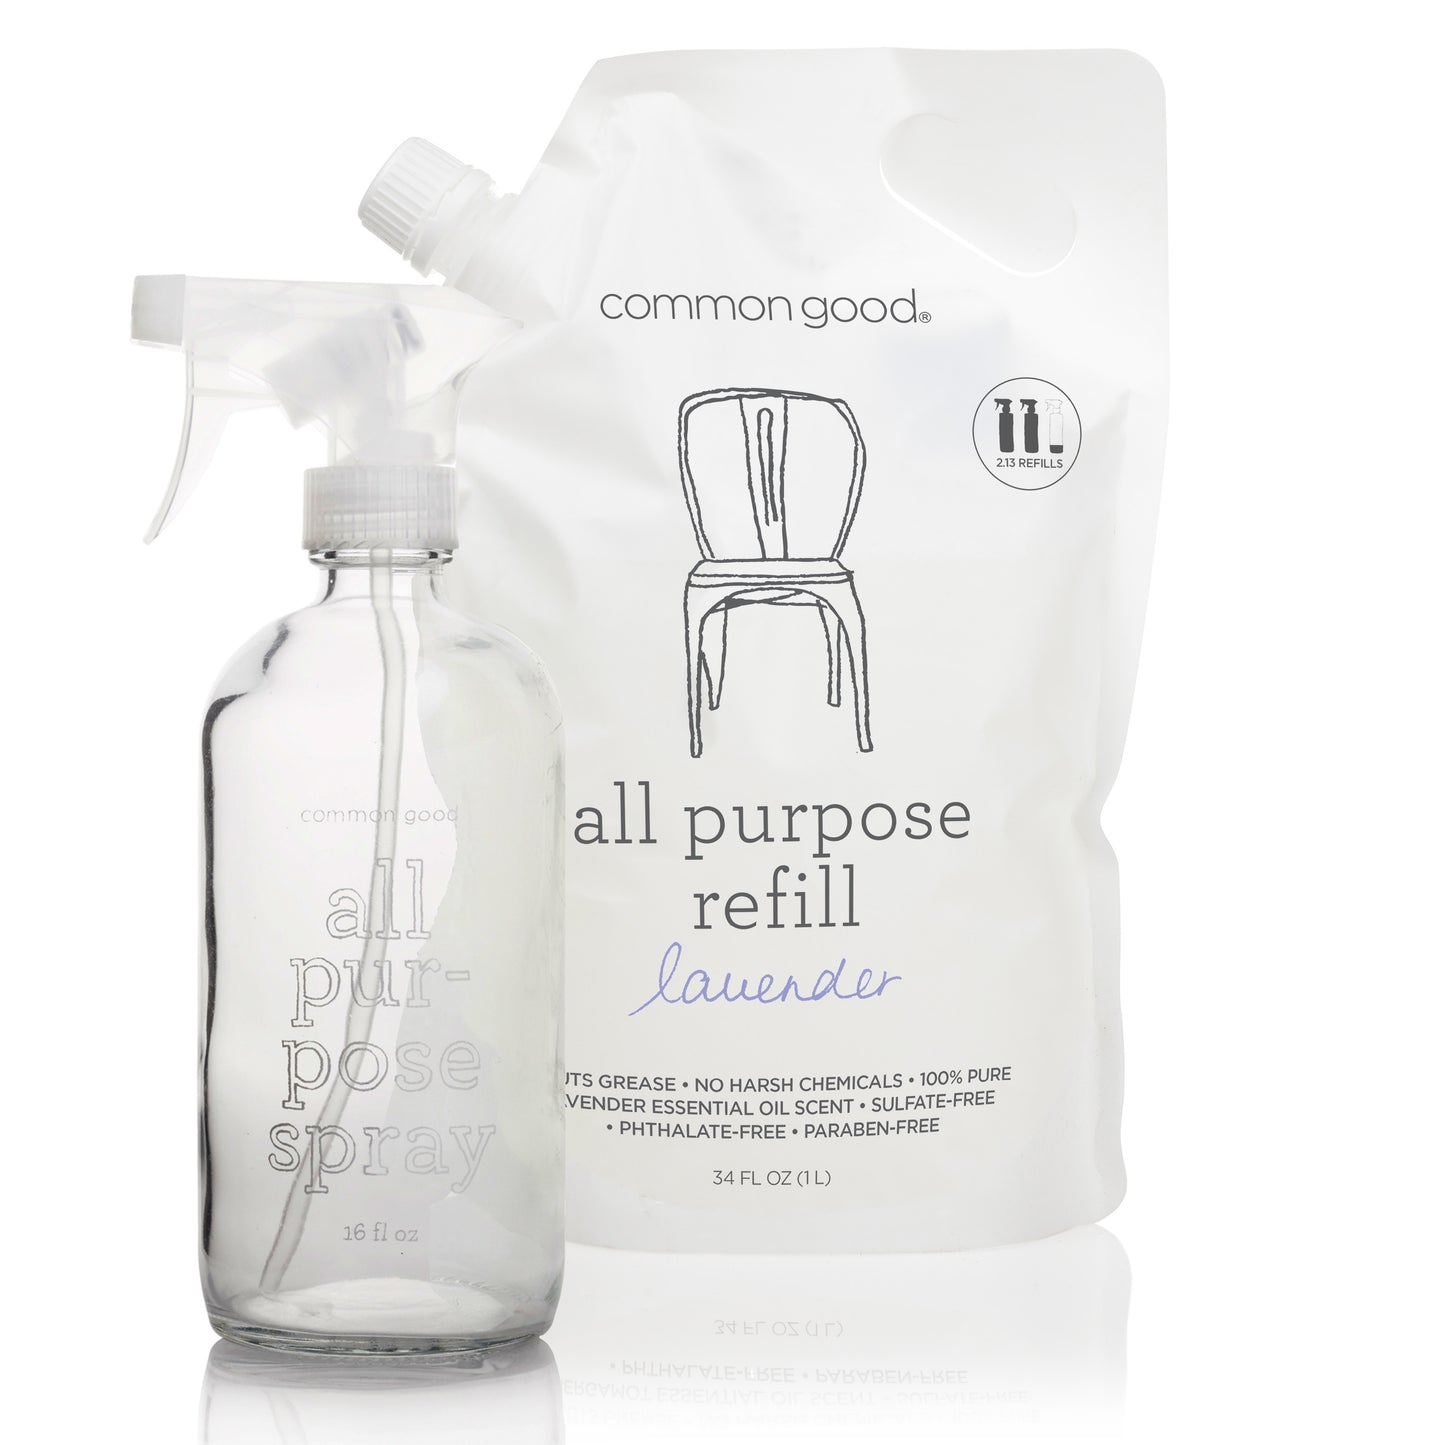 All Purpose Cleaner Refill Pouch and Glass Bottle Set